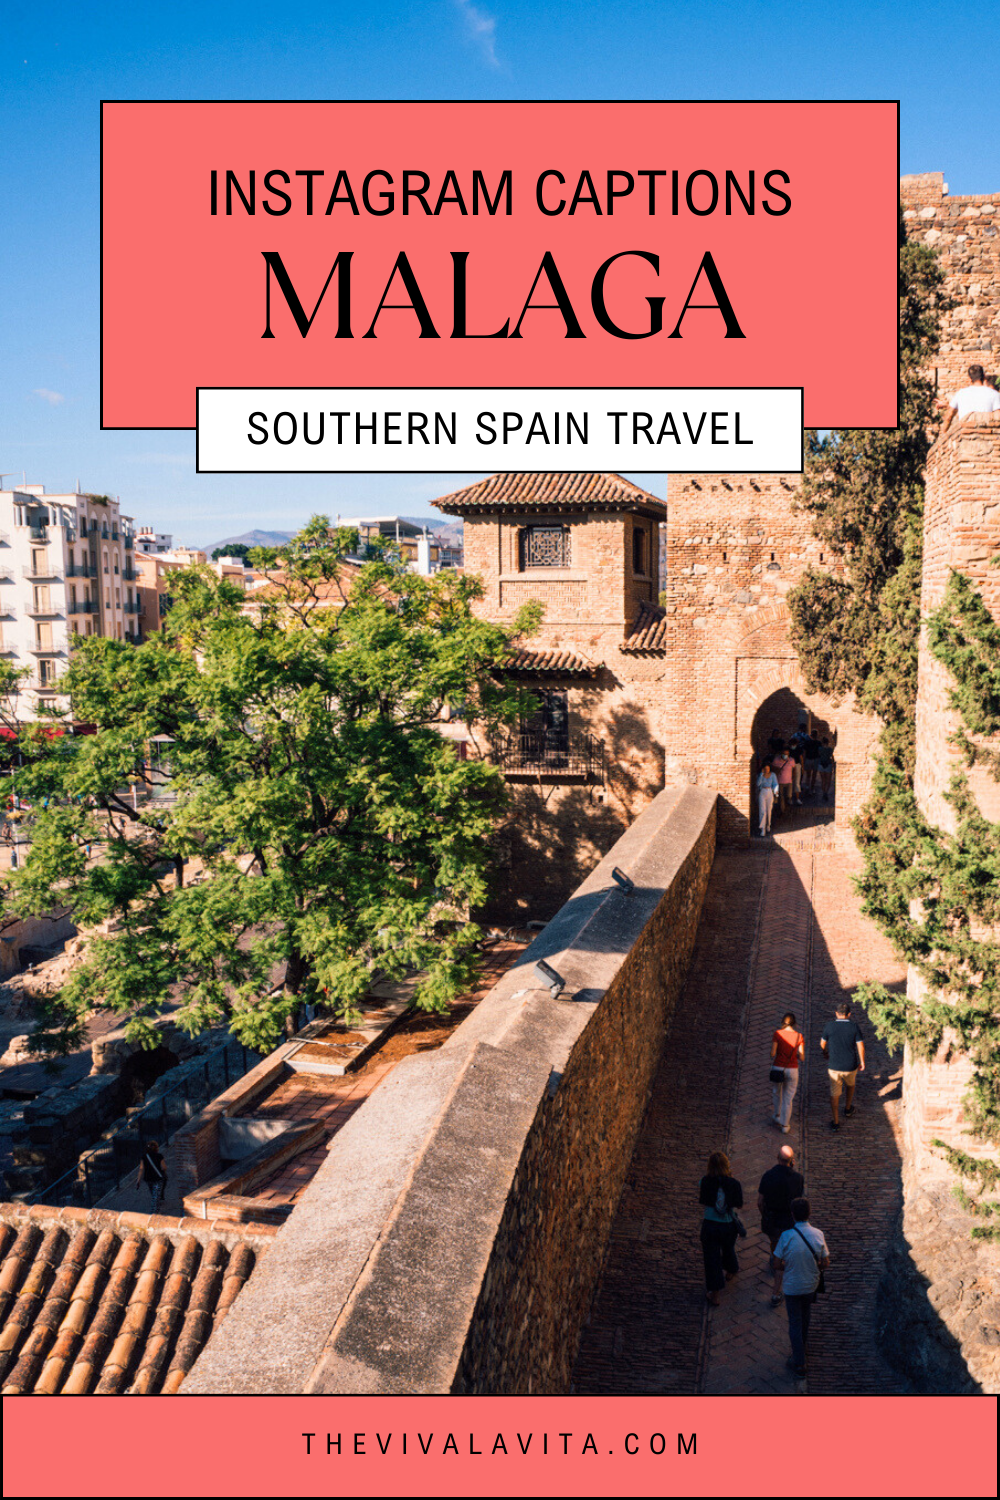 pinterest image showing the entrance to the Alcazaba of Malaga in Southern Spain, with a headline: Instagram captions Malaga